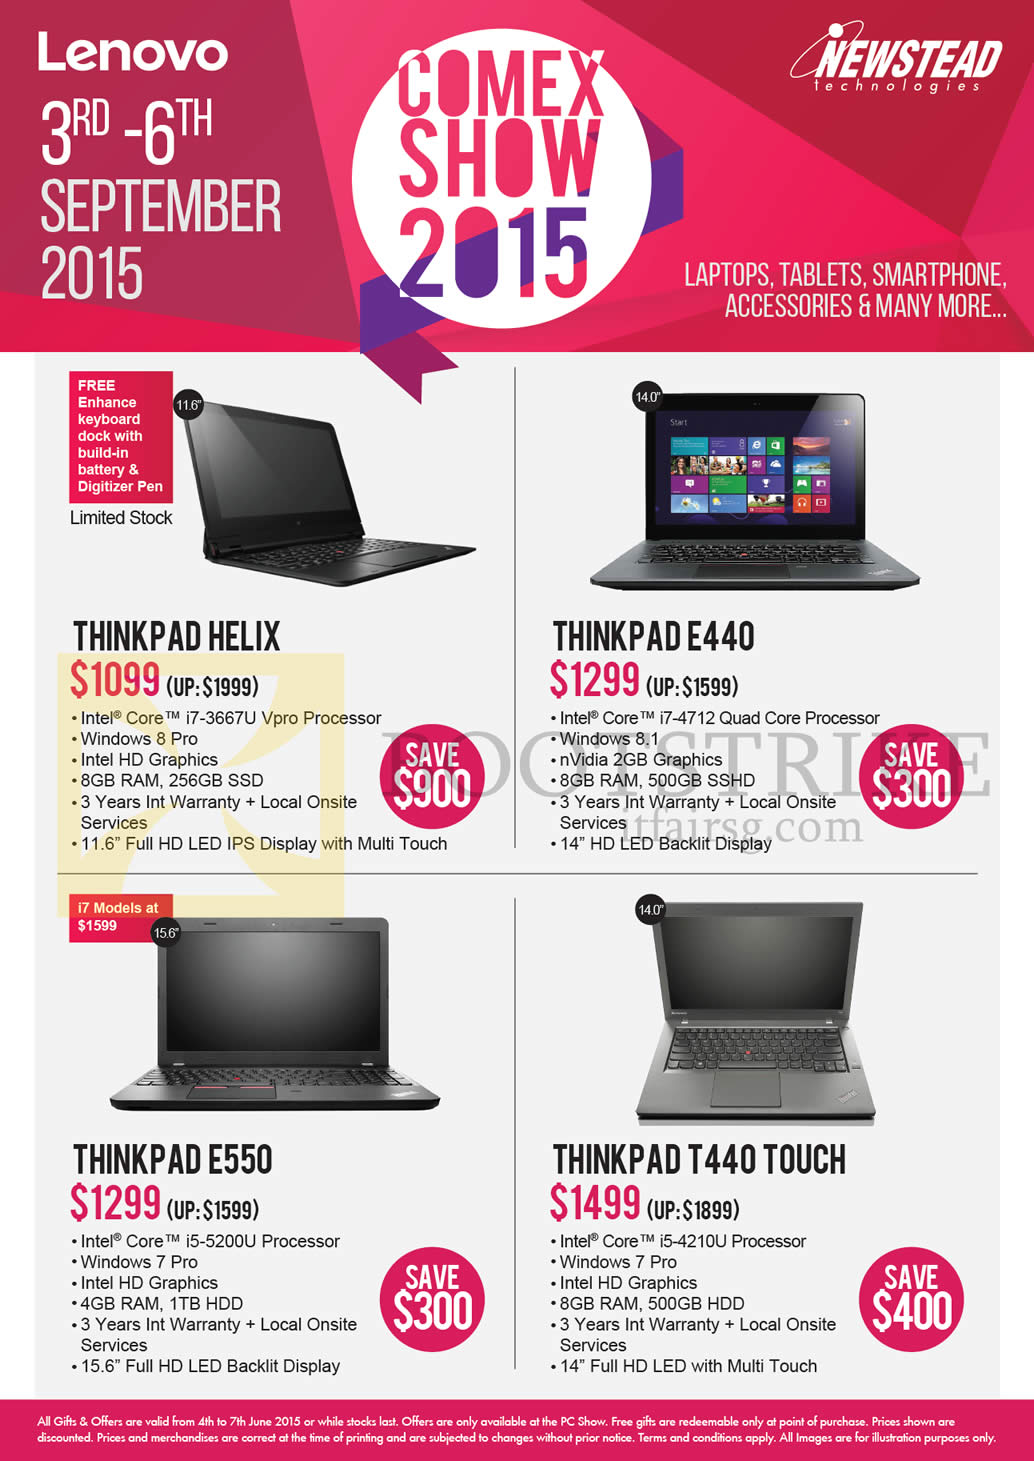 COMEX 2015 price list image brochure of Lenovo Newstead Notebooks Thinkpad Helix, E440, E550, T440 Touch